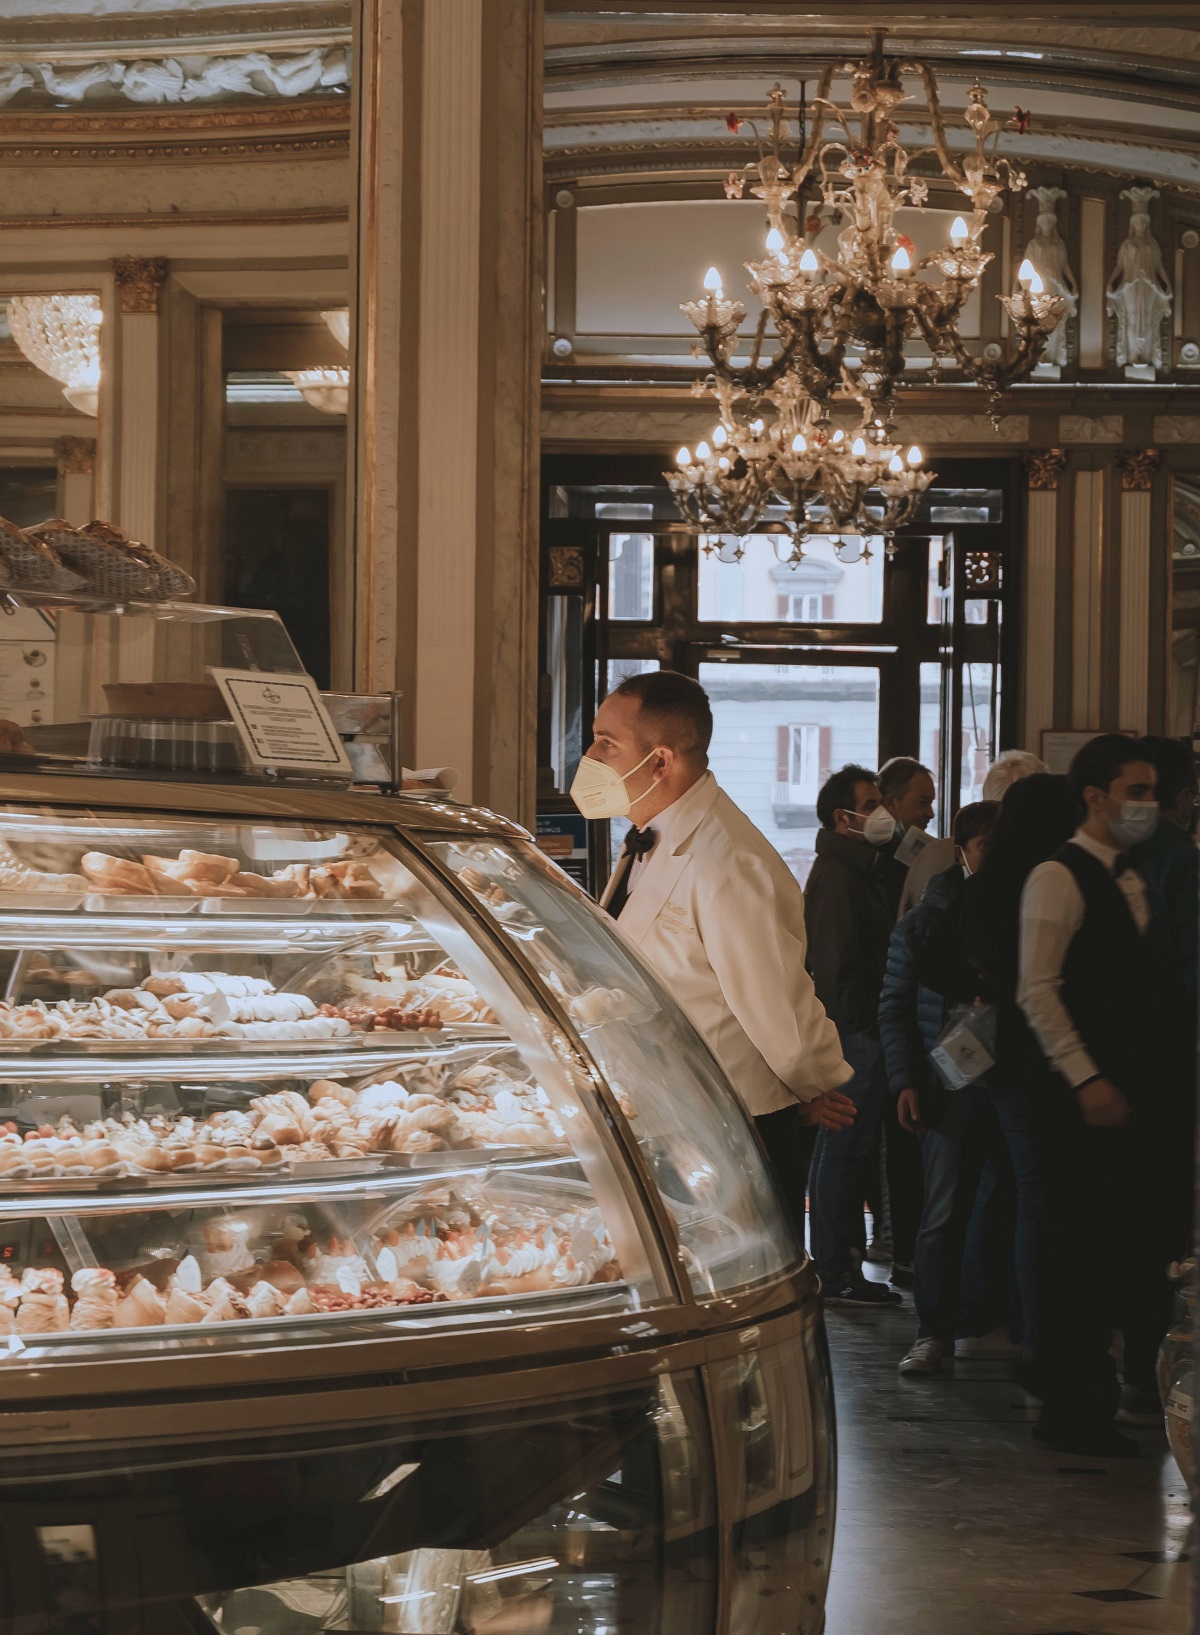 Bakery counter with pastry and waiter in Naples